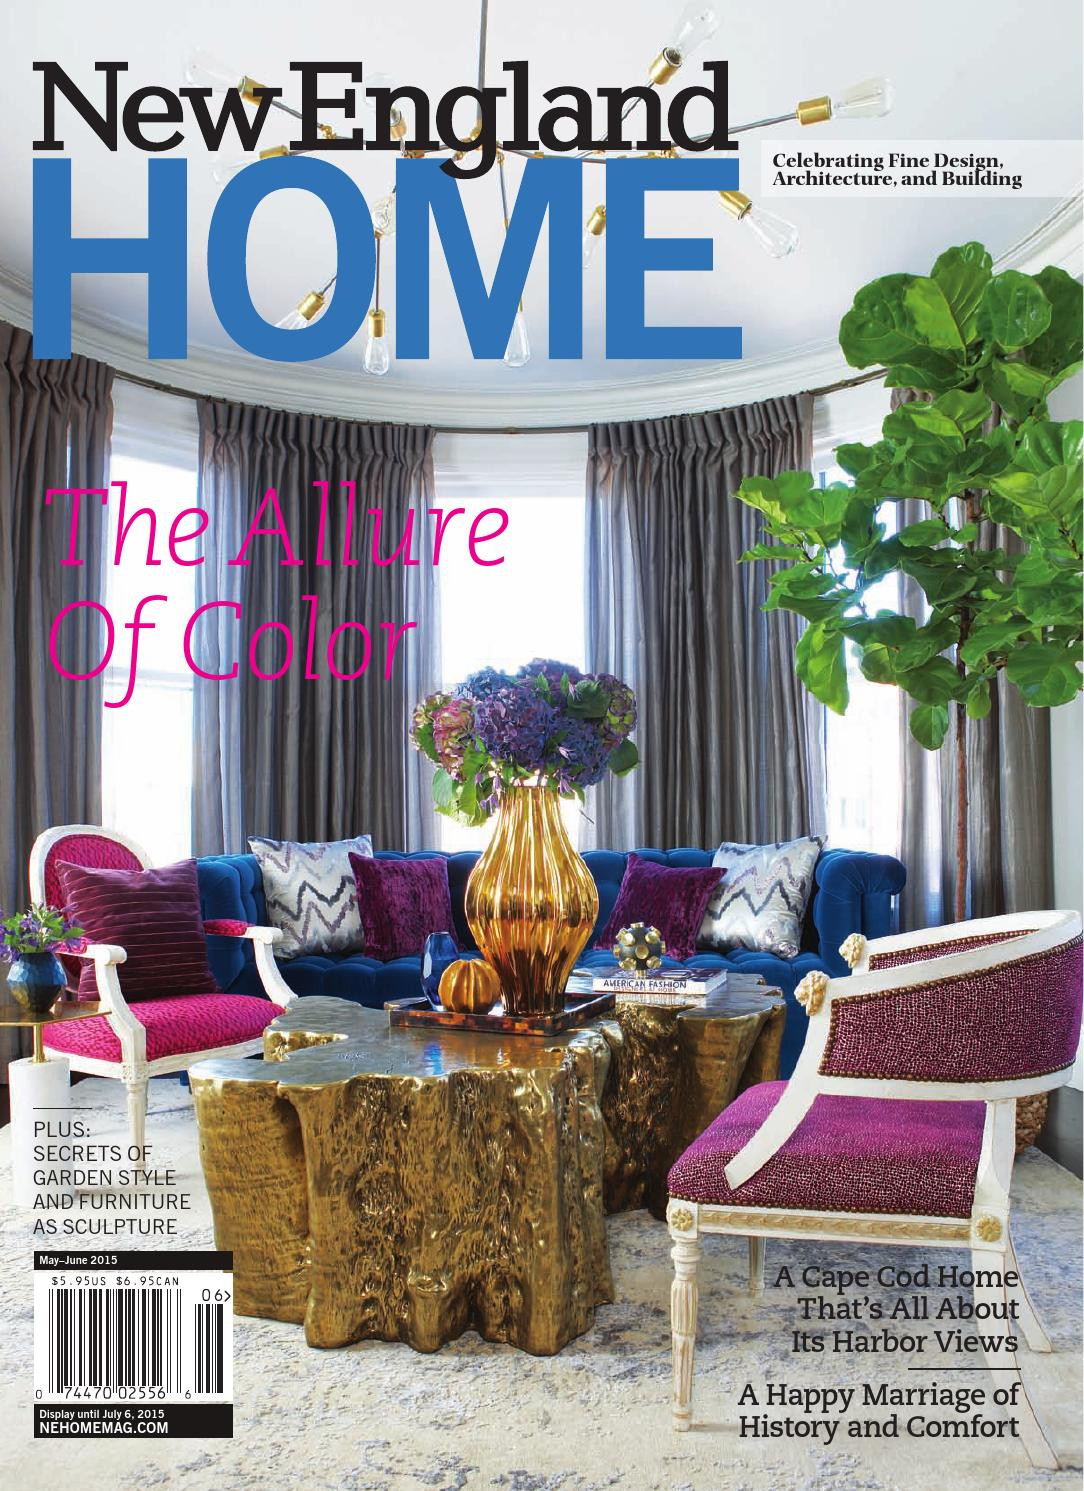 30 Great Jonathan Adler Gala Vase 2024 free download jonathan adler gala vase of new england home may june 2015 by new england home magazine llc issuu pertaining to page 1